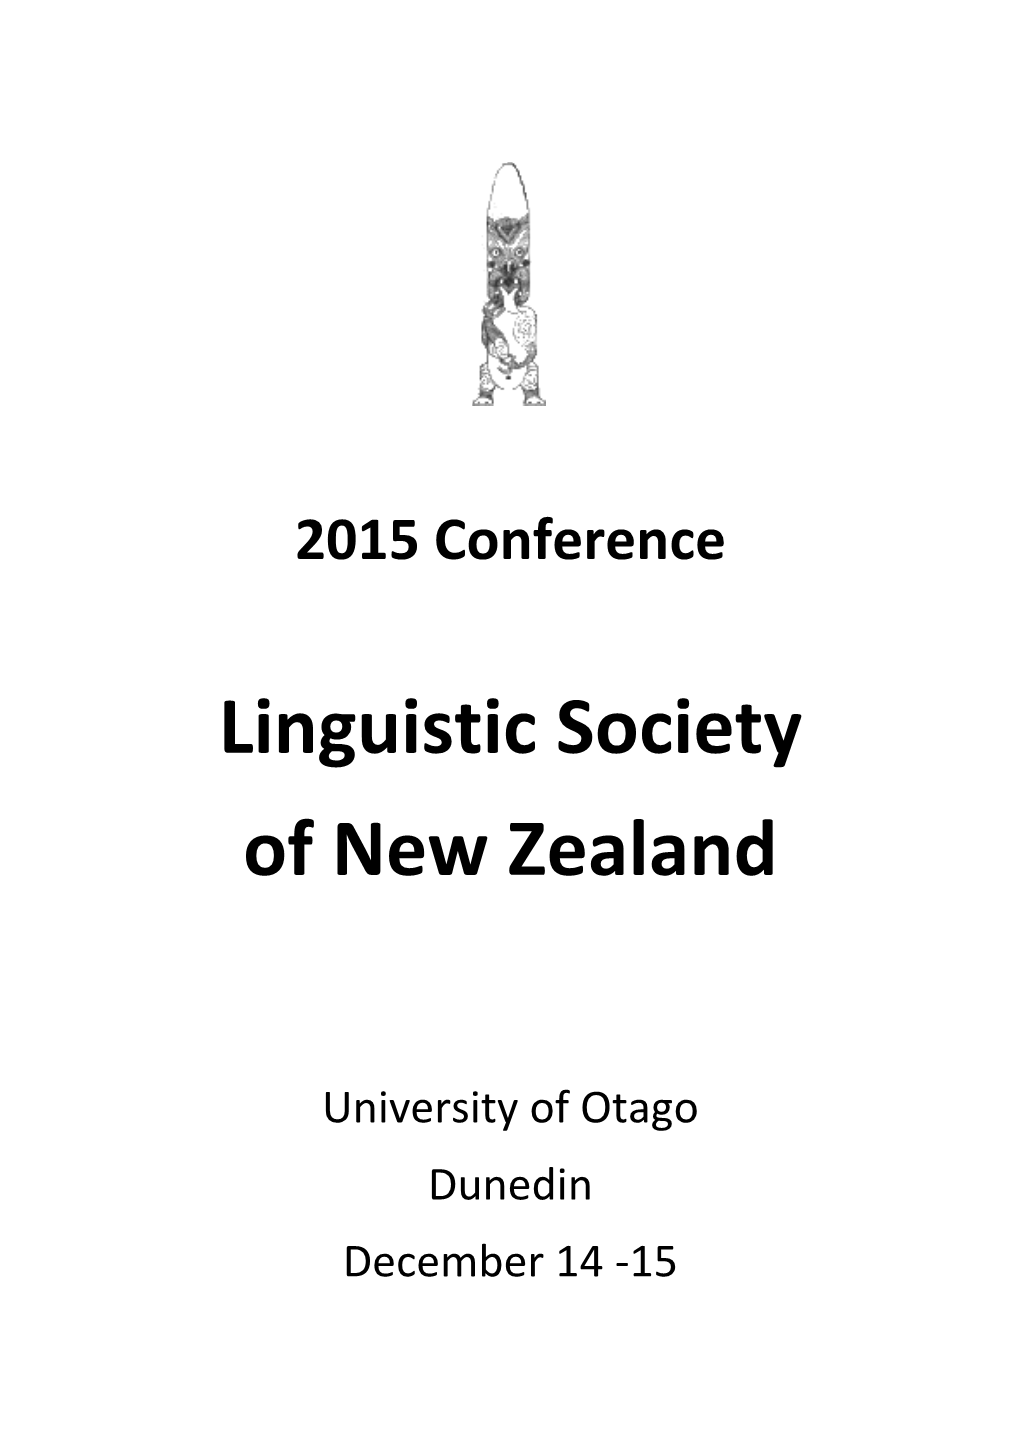 Linguistic Society of New Zealand